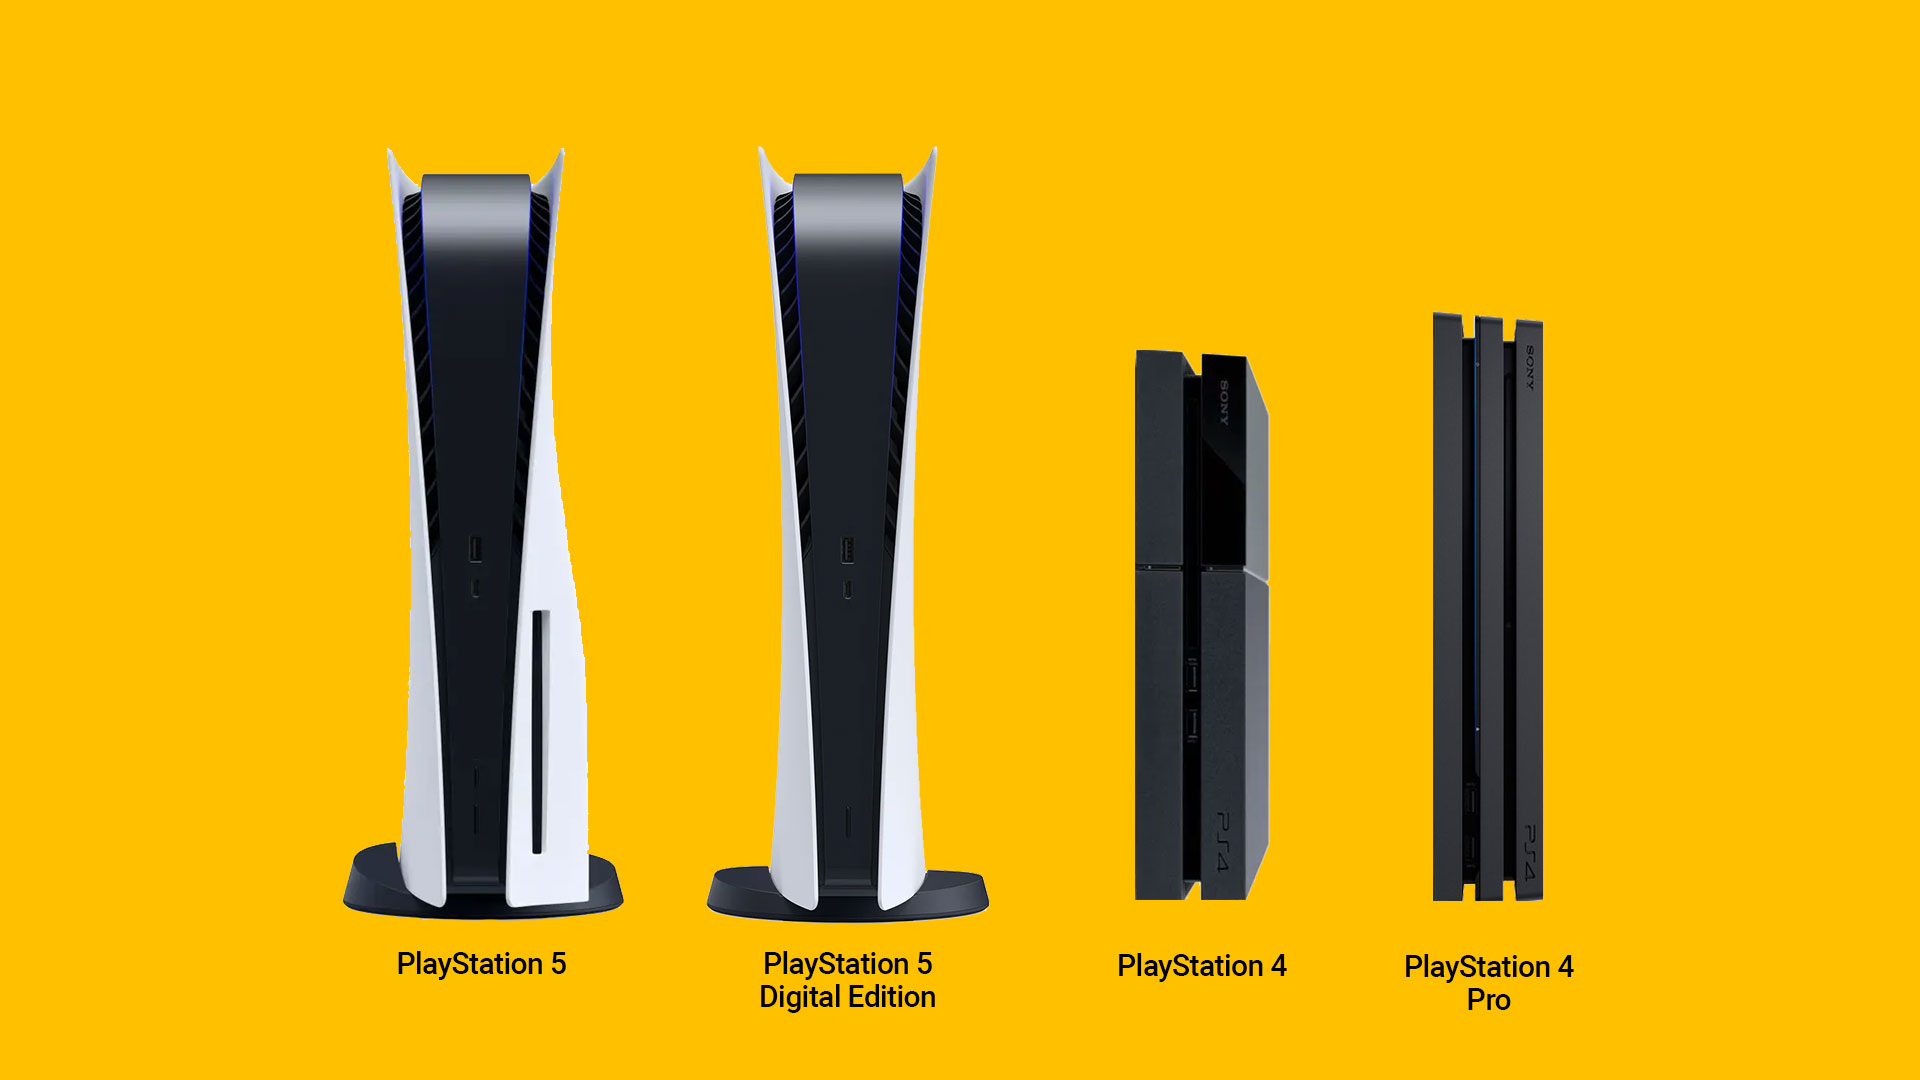 And here's the PS5 vs the PS4 (Image: Kotaku)